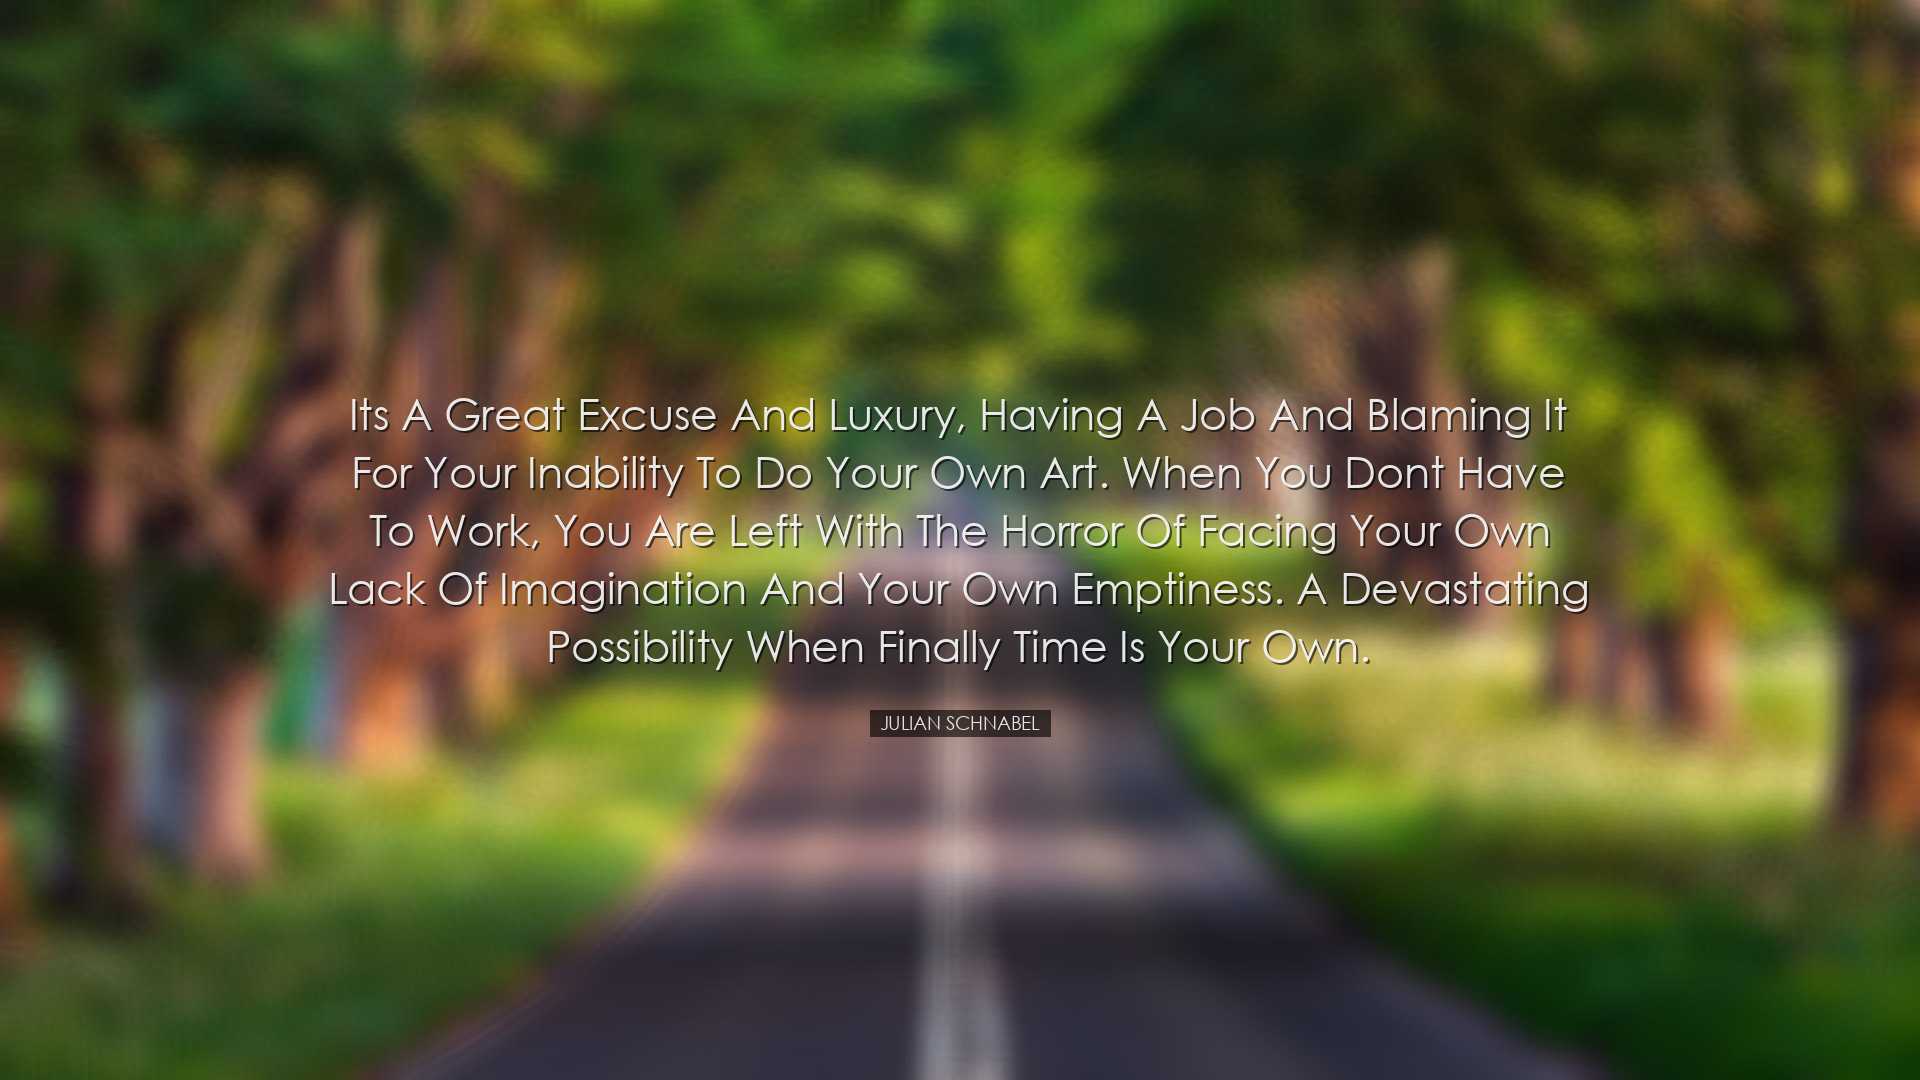 Its a great excuse and luxury, having a job and blaming it for you